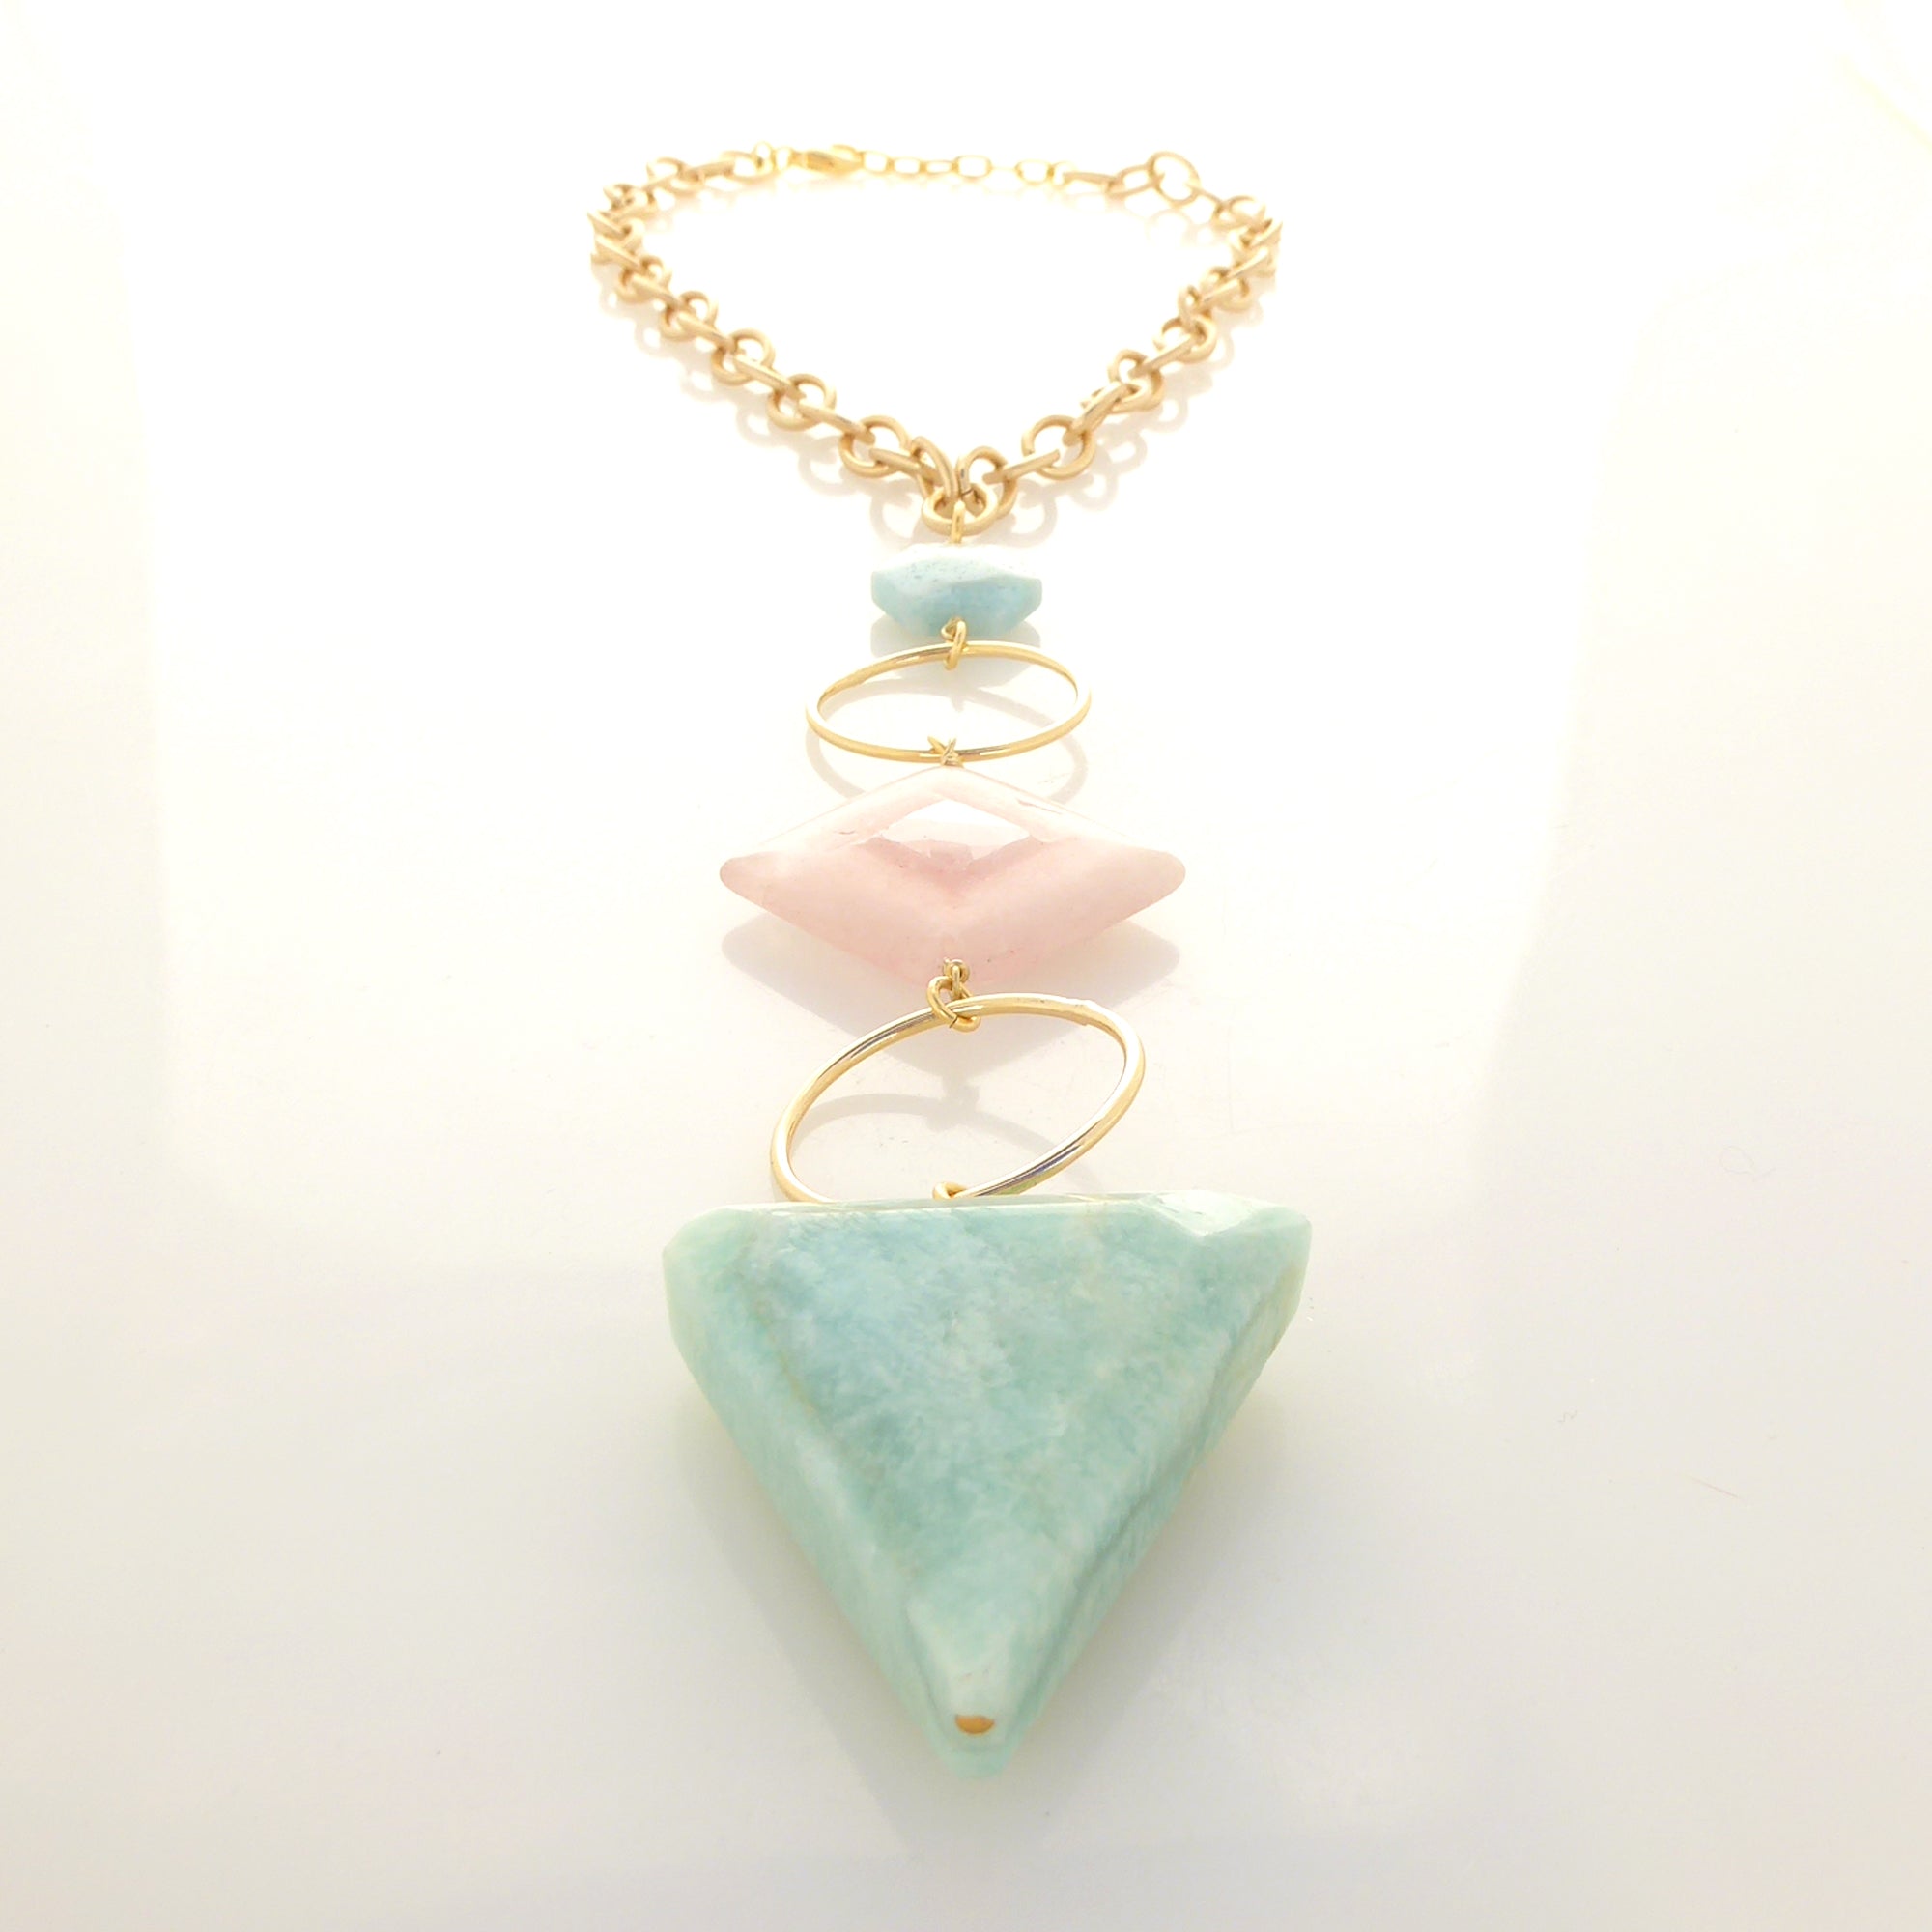 Gioia amazonite and rose quartz necklace by Jenny Dayco 3